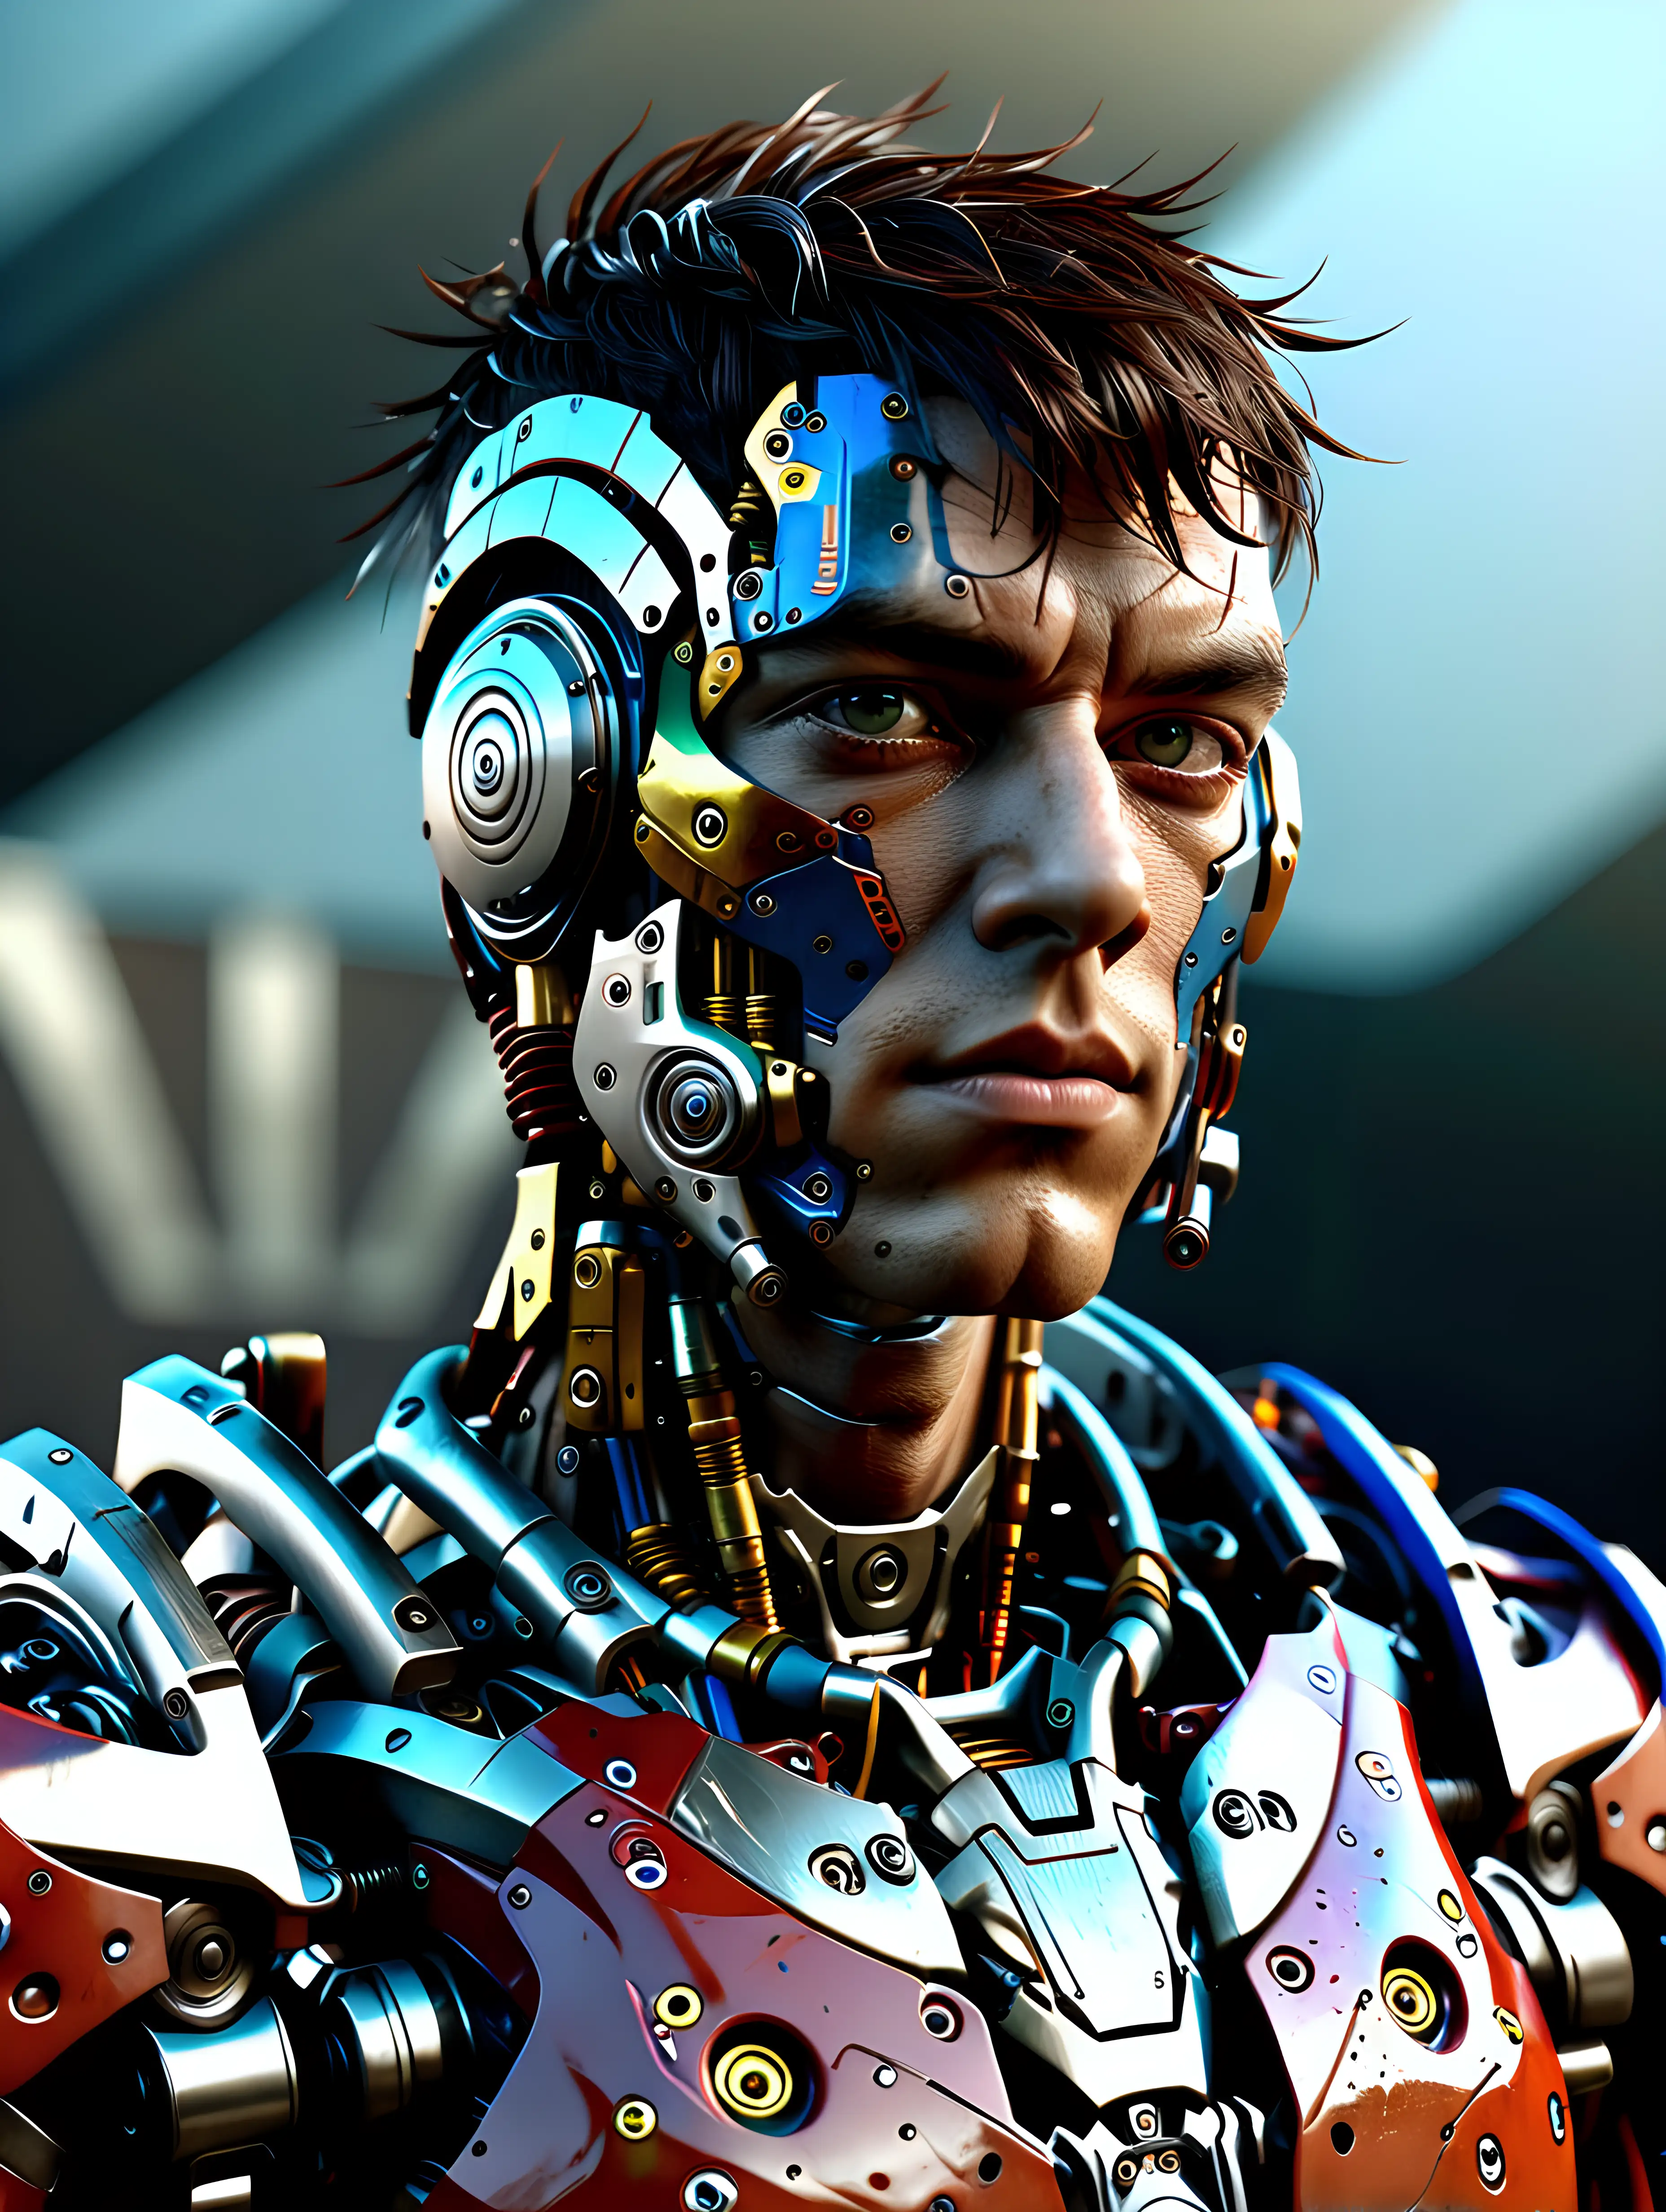 Advanced Cyborg European male-teenager Warrior, Mixed Materials, Chaotic, Ceramic and Metal Materials, Colorful, Front View, POV, Symetrical, Ultra Realistic, High Extraordinary, Ultra Sharp, Award Winning Photography, Perfection, 64K, HD, Cinematography, Photorealistic, Epic Composition Unreal Engine, Exquisite Details, Intricate Cinematic, Color Grading, Ultra-Wide Angle, Depth of Field, Hyper-Detailed, Hyper-Realistic, Beautifully Colored, Insane Detail,